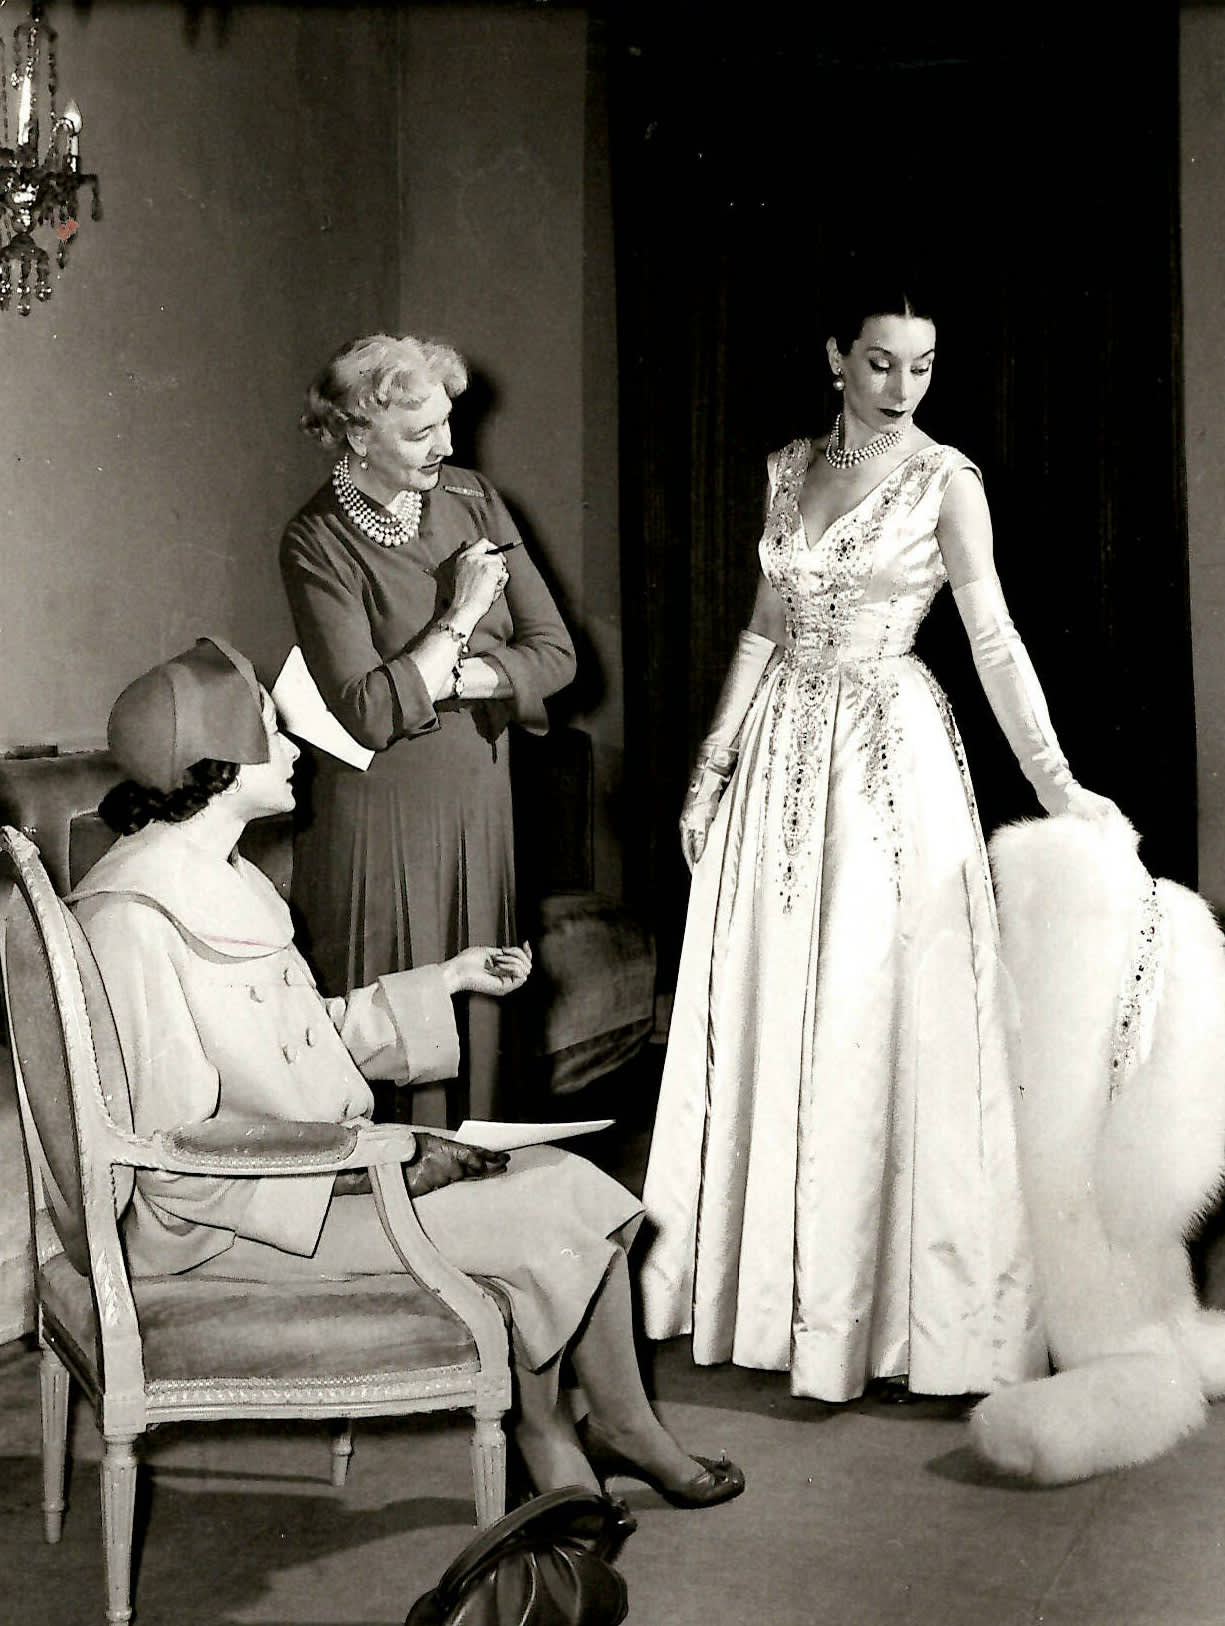 HARTNELL FAMOUS MODEL DOLORES MODELS IN THE SALON AT 26 BRUTON STREET MAYFAIR C 1948 3 bdiiga